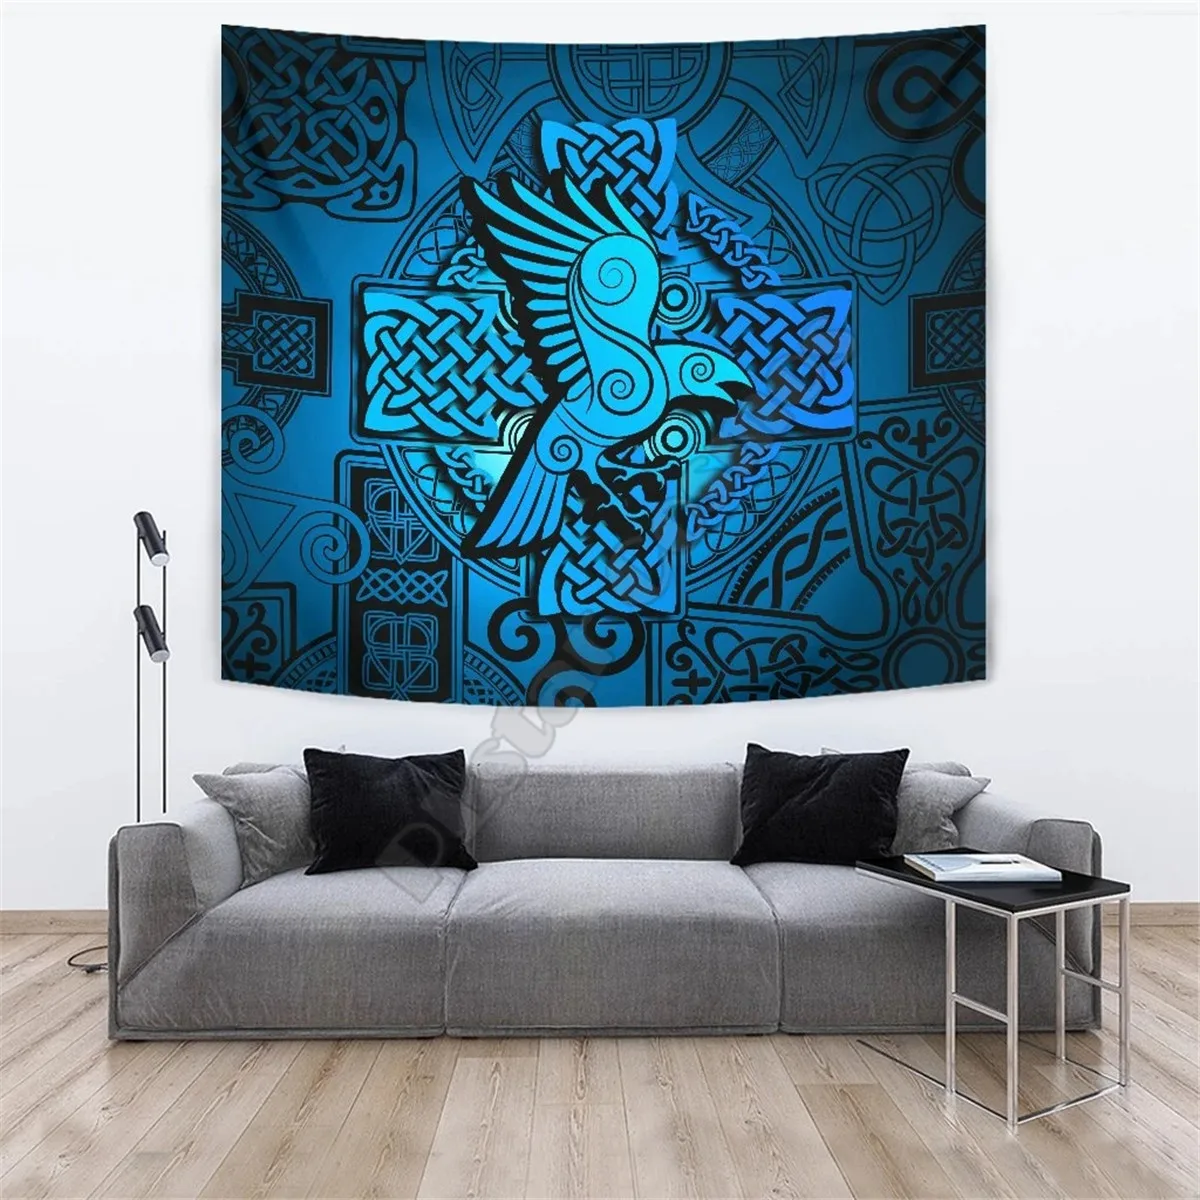 

Viking Style Tapestry - Raven Odin Celtic Cyan 3D Printed Wall Tapestry Rectangular Home Decor Wall Hanging Home Decoration